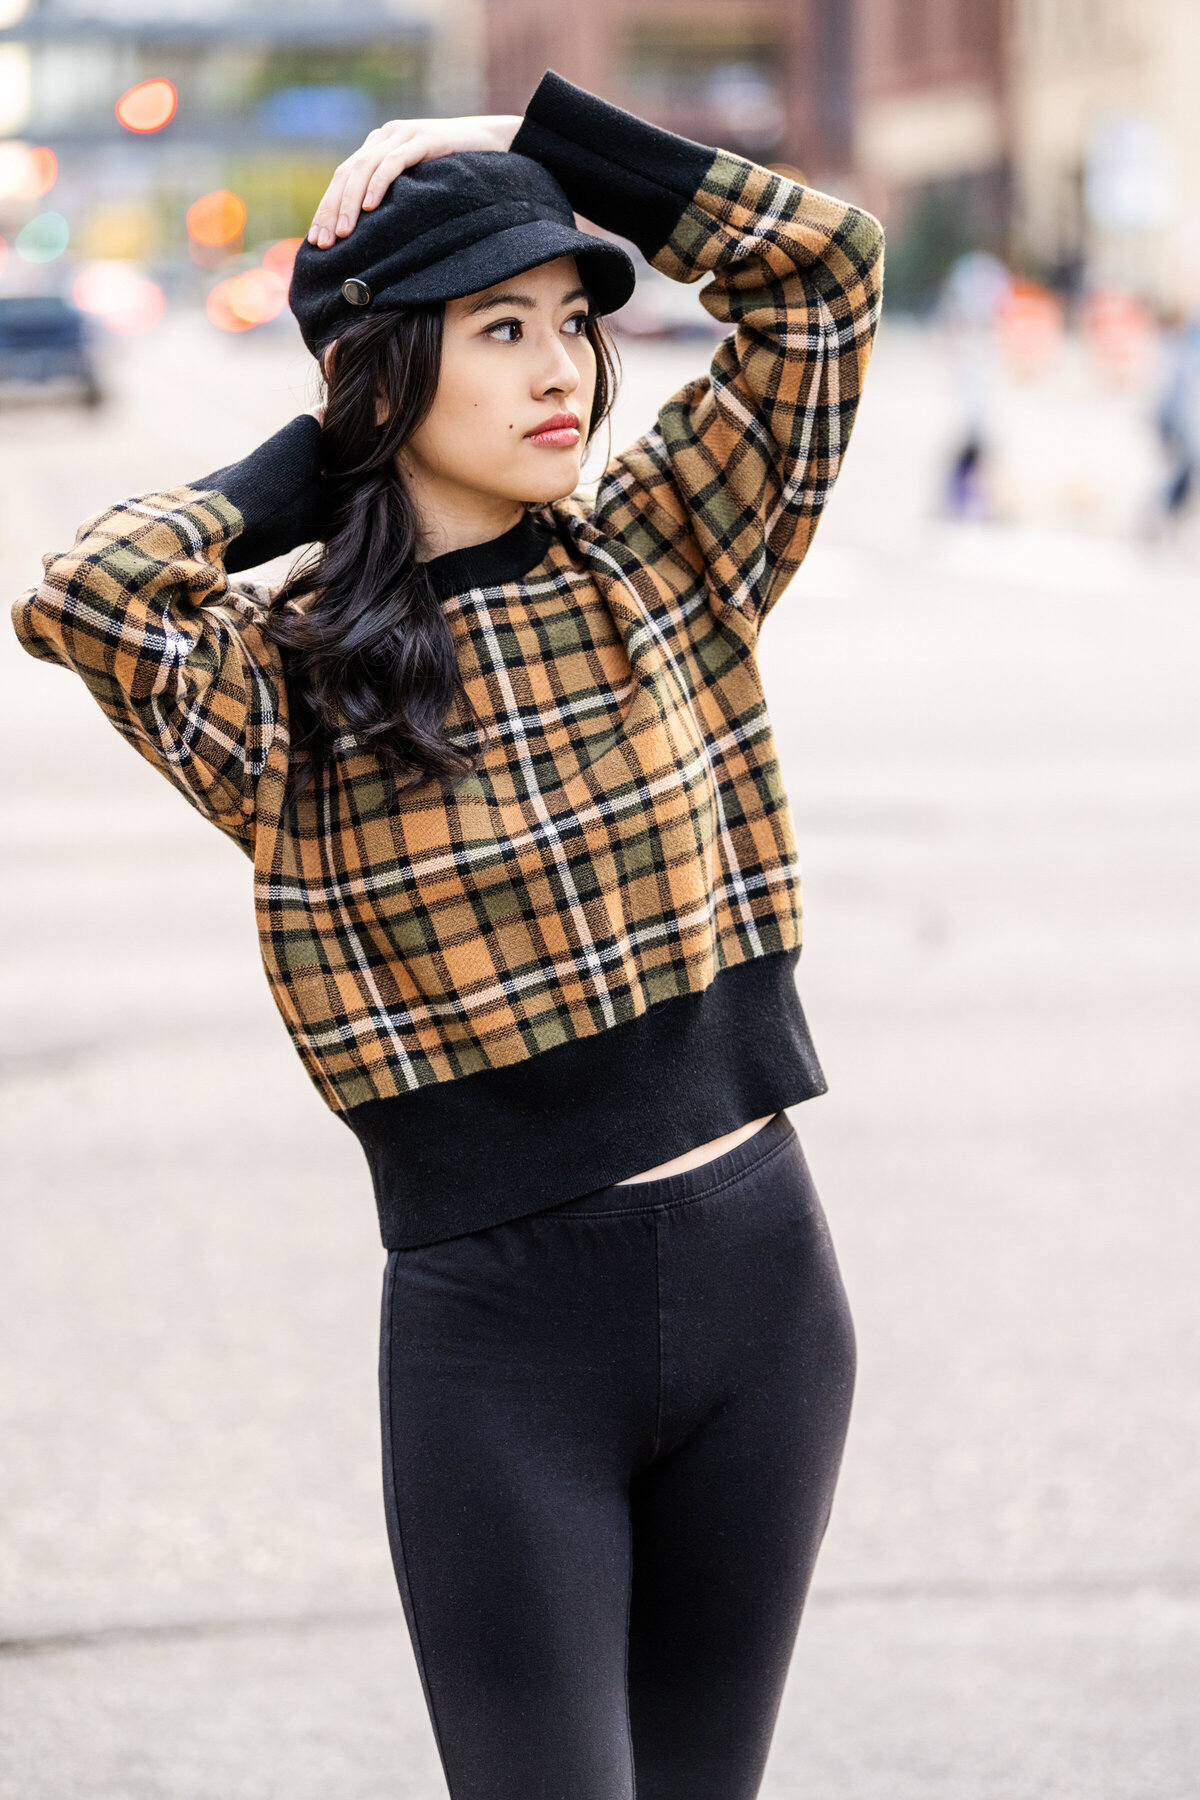 senior photo of girl with plaid sweater and hat in urban street